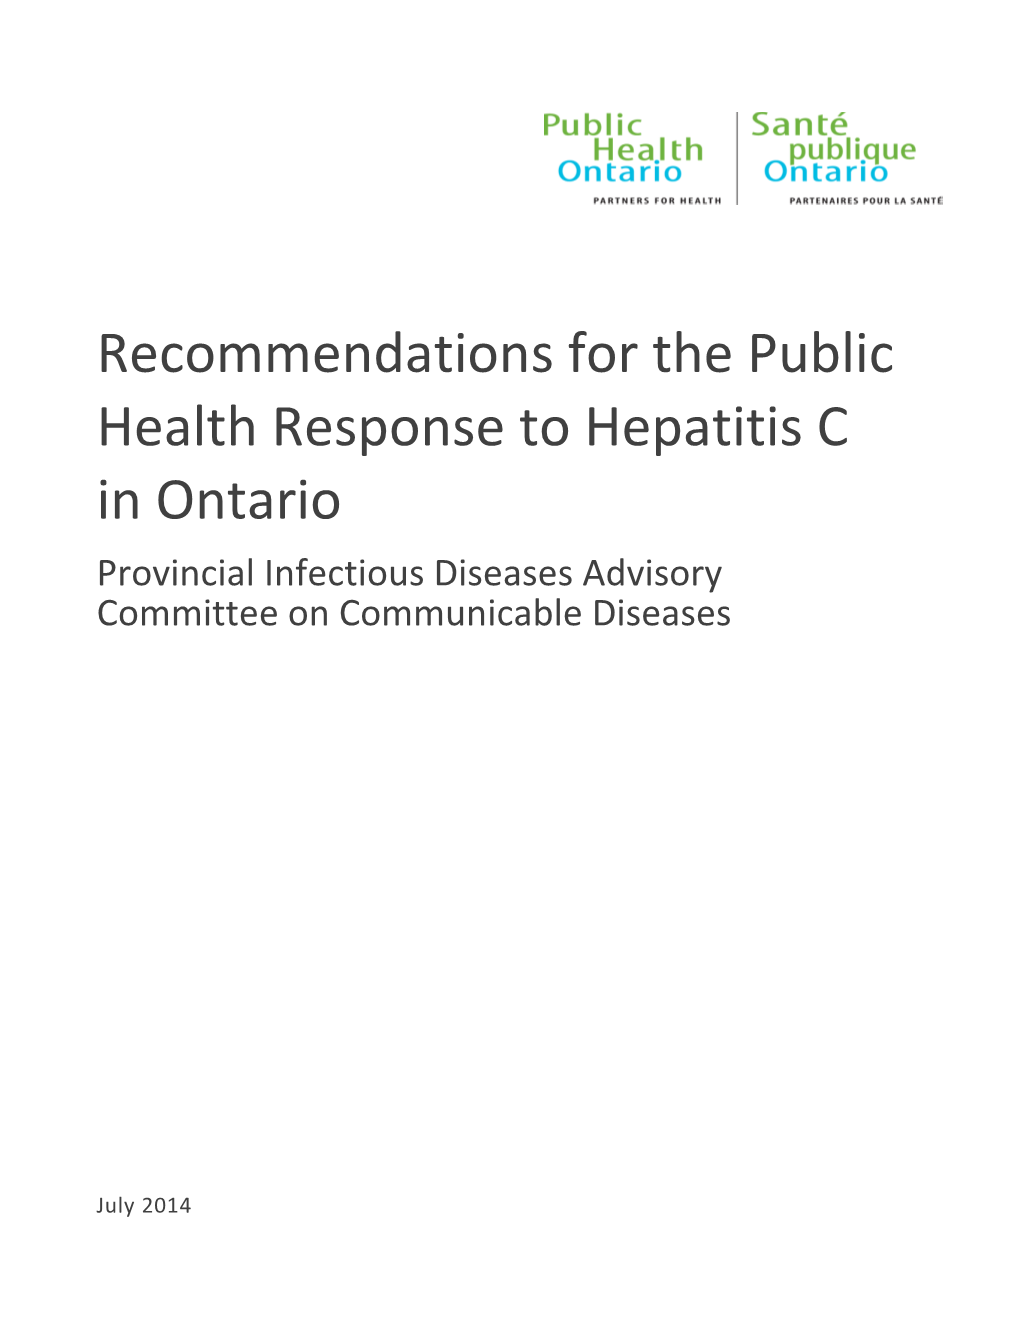 Recommendations for the Public Health Response to Hepatitis C in Ontario Provincial Infectious Diseases Advisory Committee on Communicable Diseases